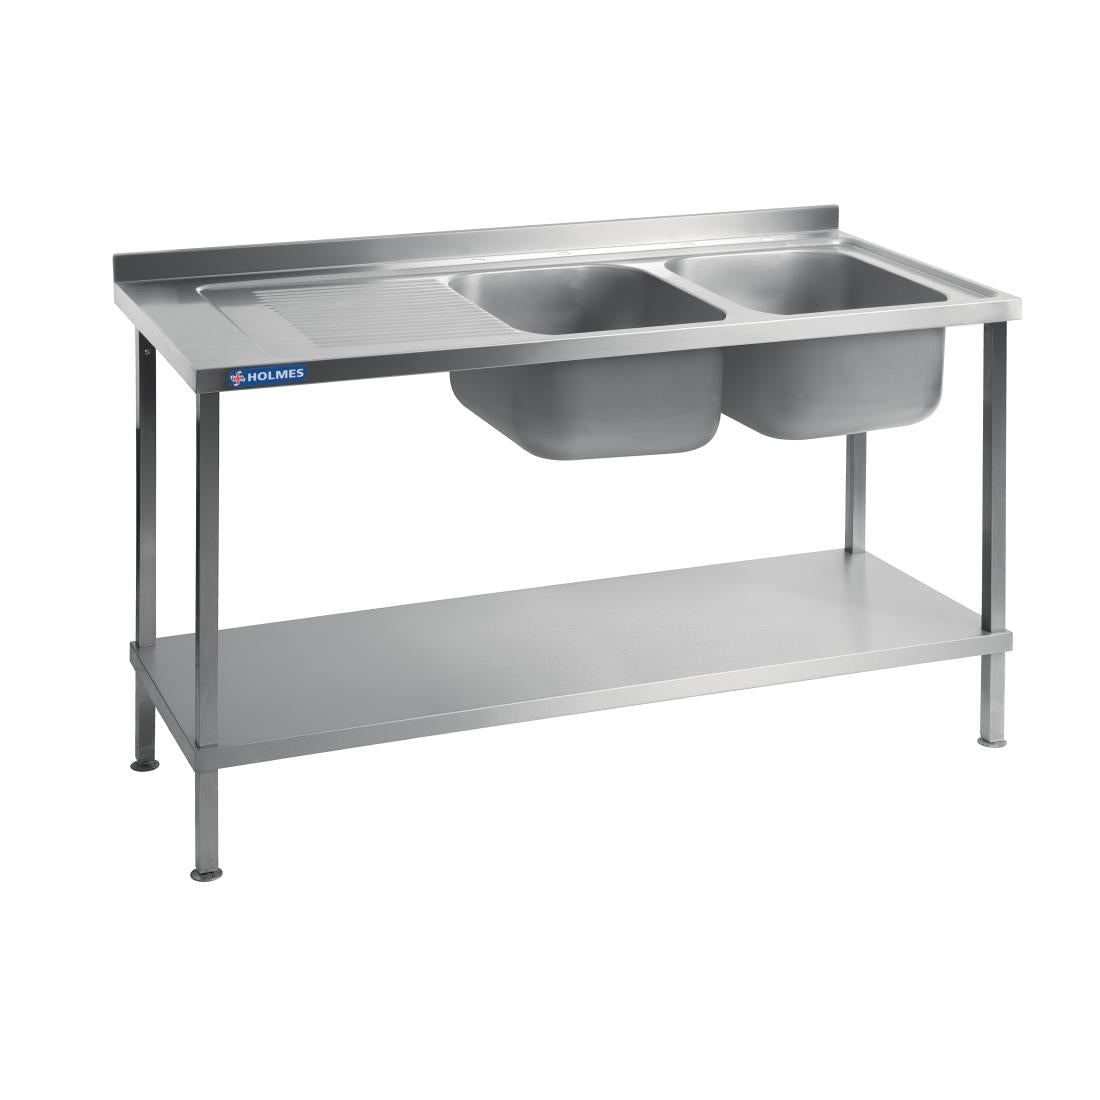 DR395 Holmes Fully Assembled Stainless Steel Sink Left Hand Drainer 1800mm JD Catering Equipment Solutions Ltd